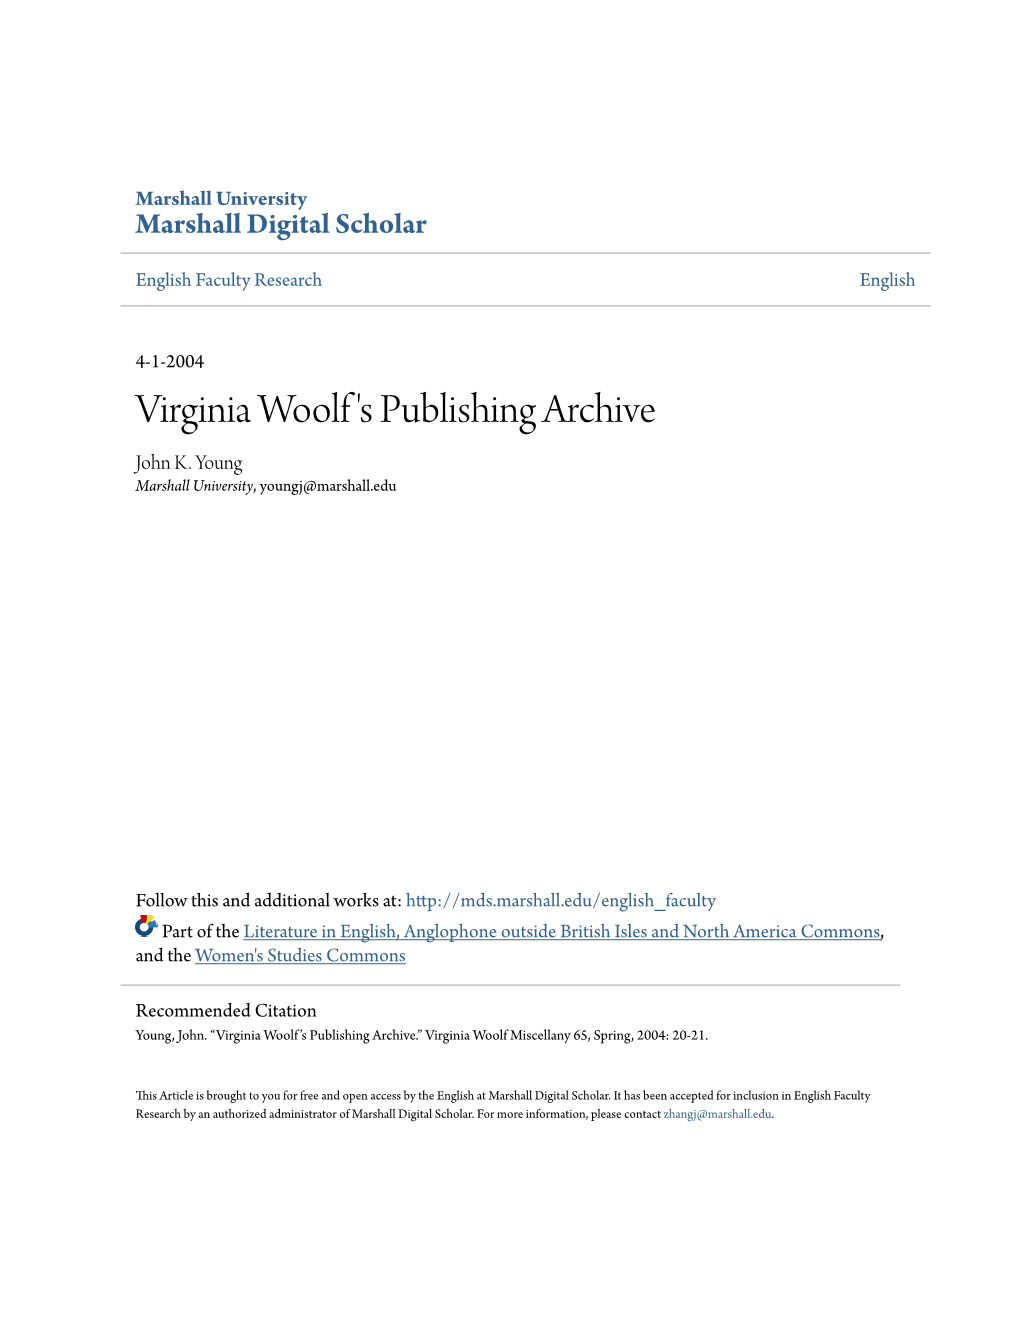 Virginia Woolf's Publishing Archive